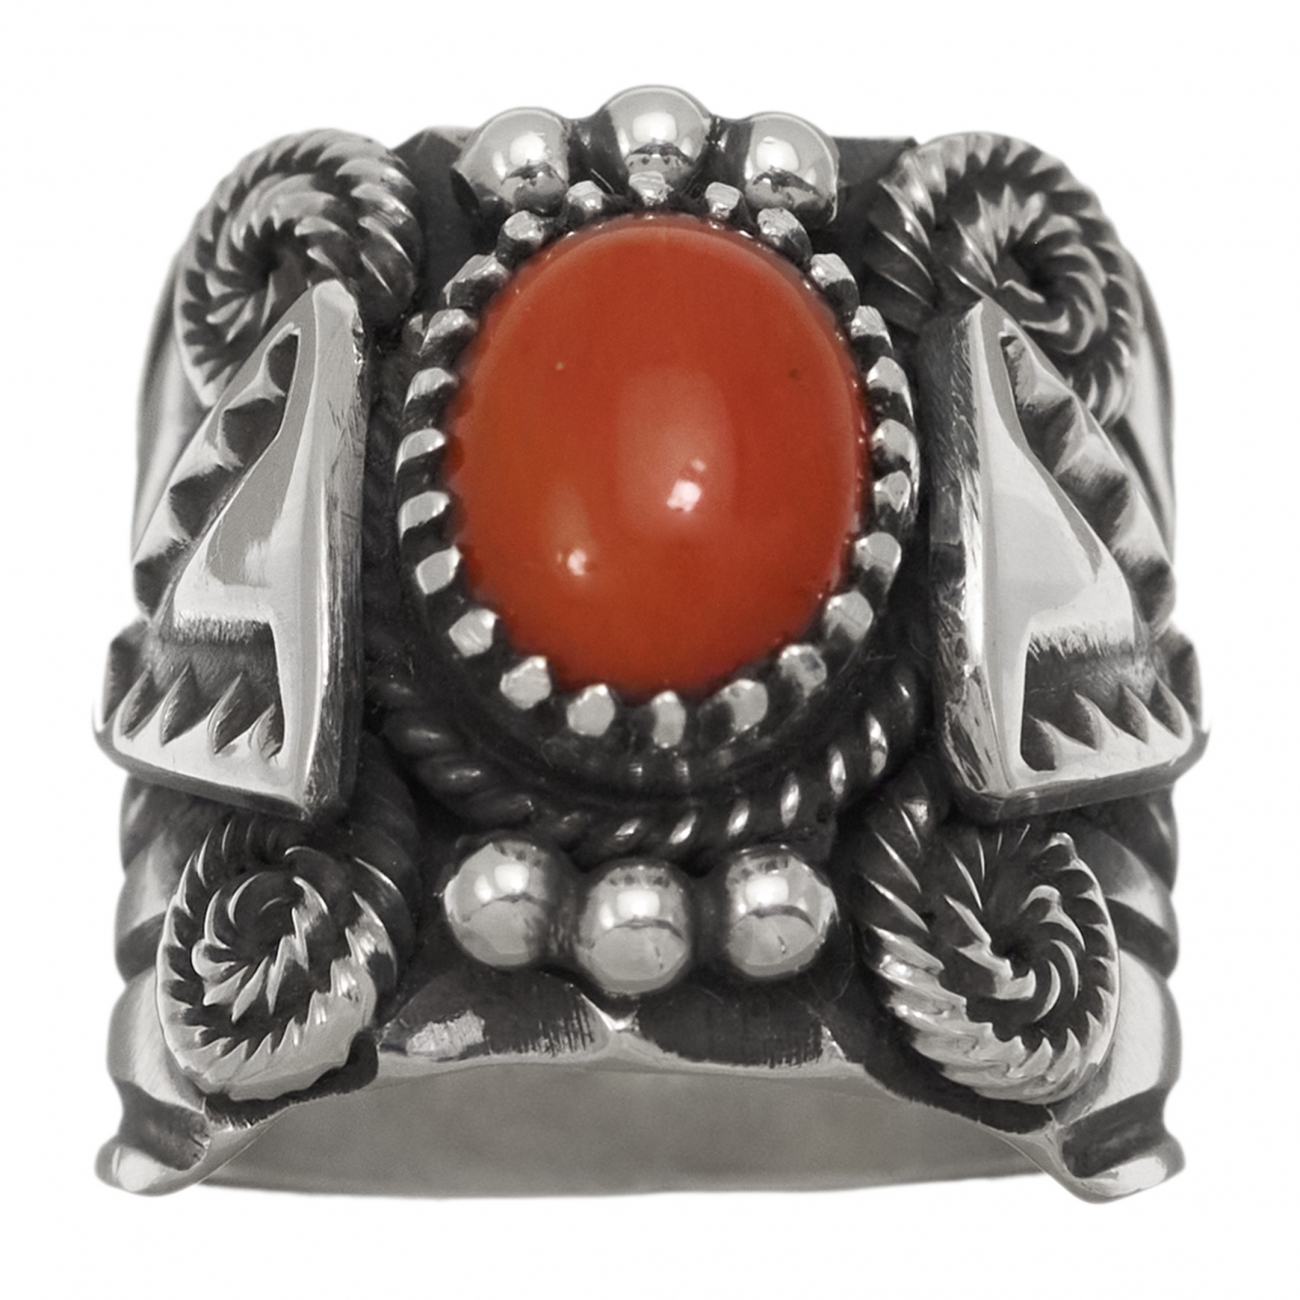 Harpo Paris unisex ring BA1071 in coral and silver